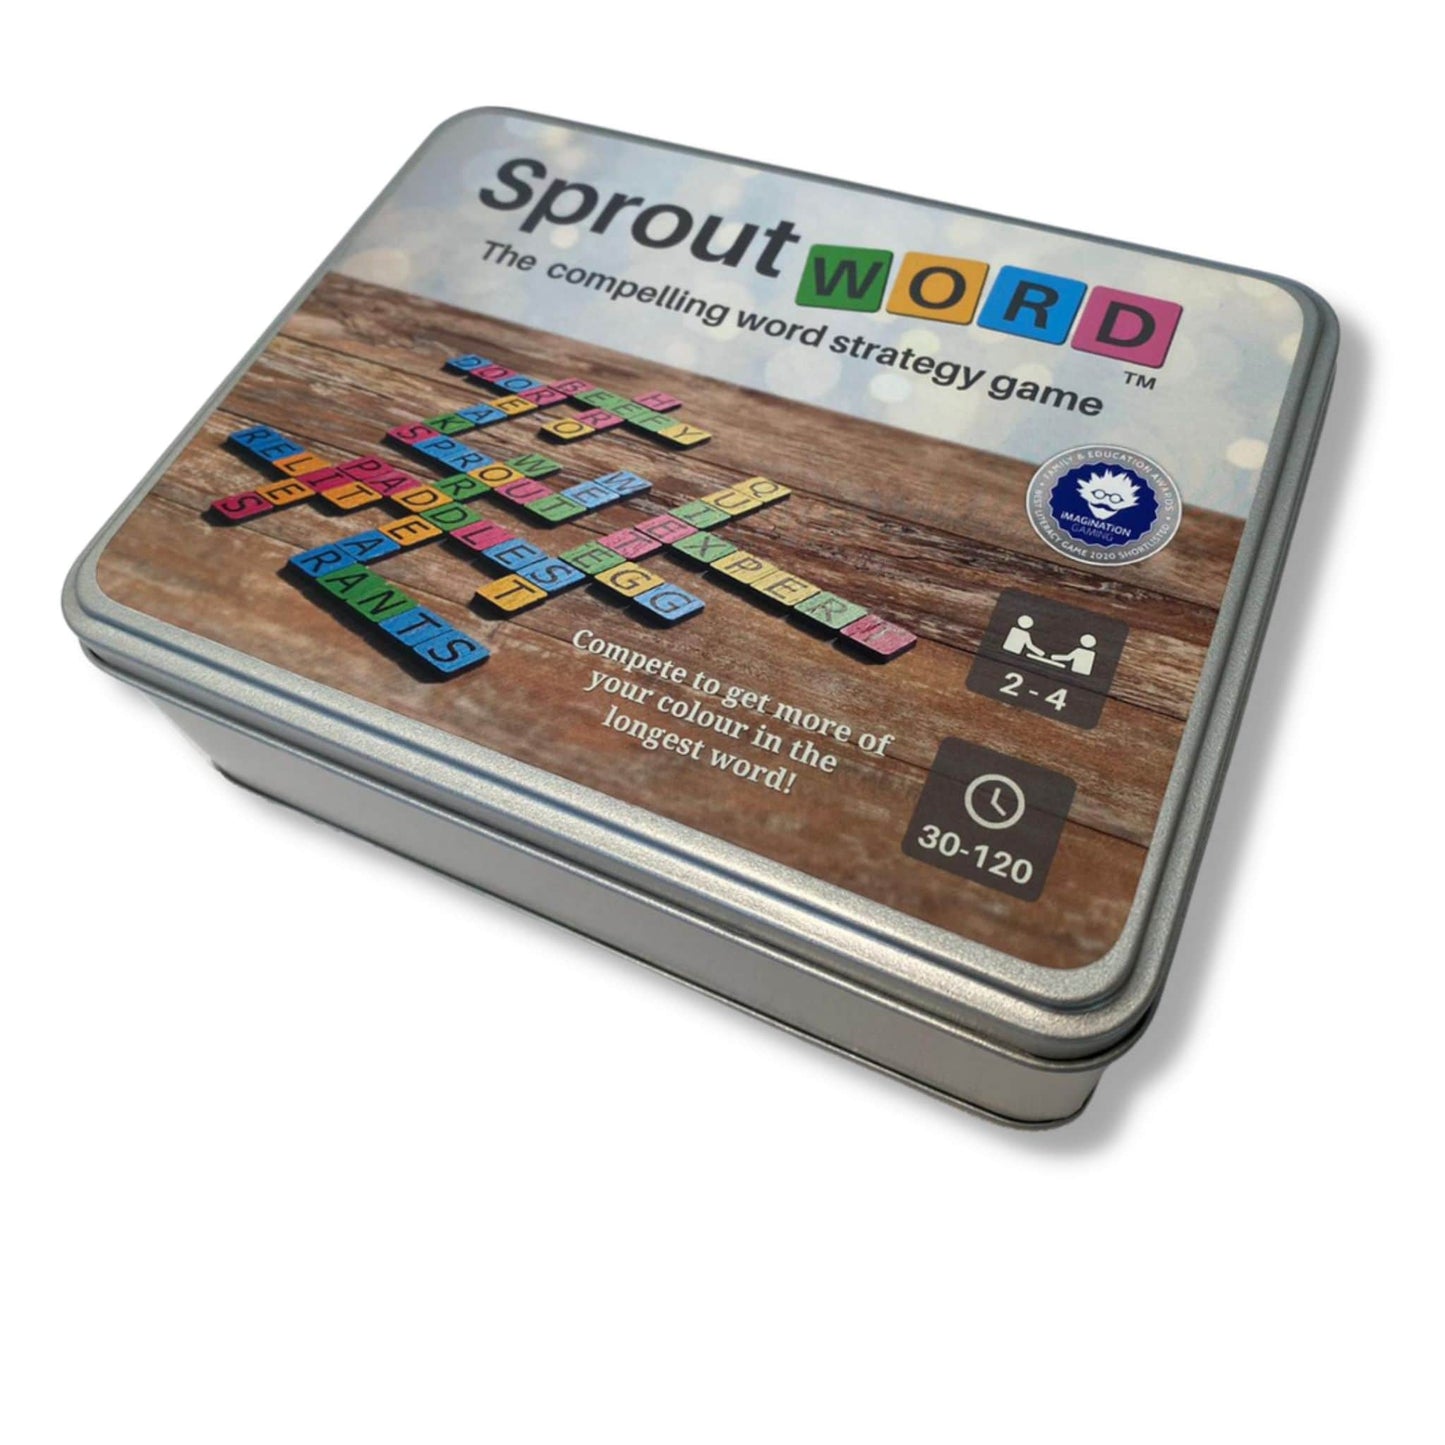 Sproutword 2 - 4 player tin from above - strategic word game